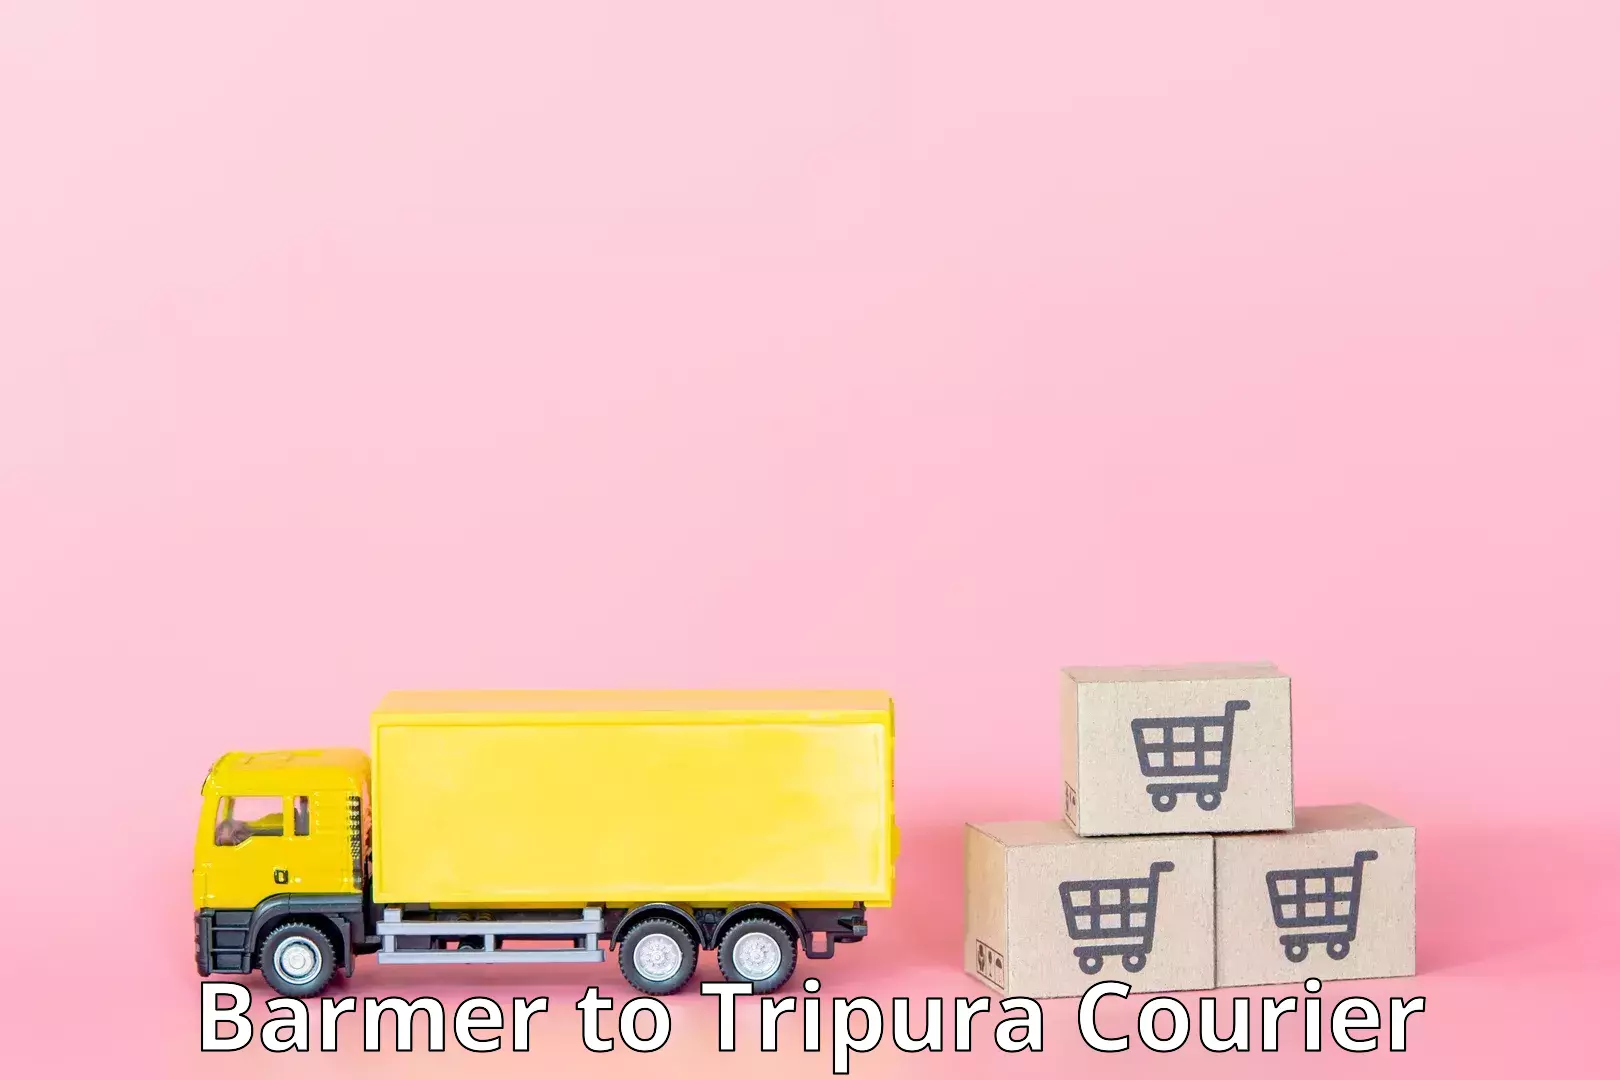 Express delivery network Barmer to Udaipur Tripura